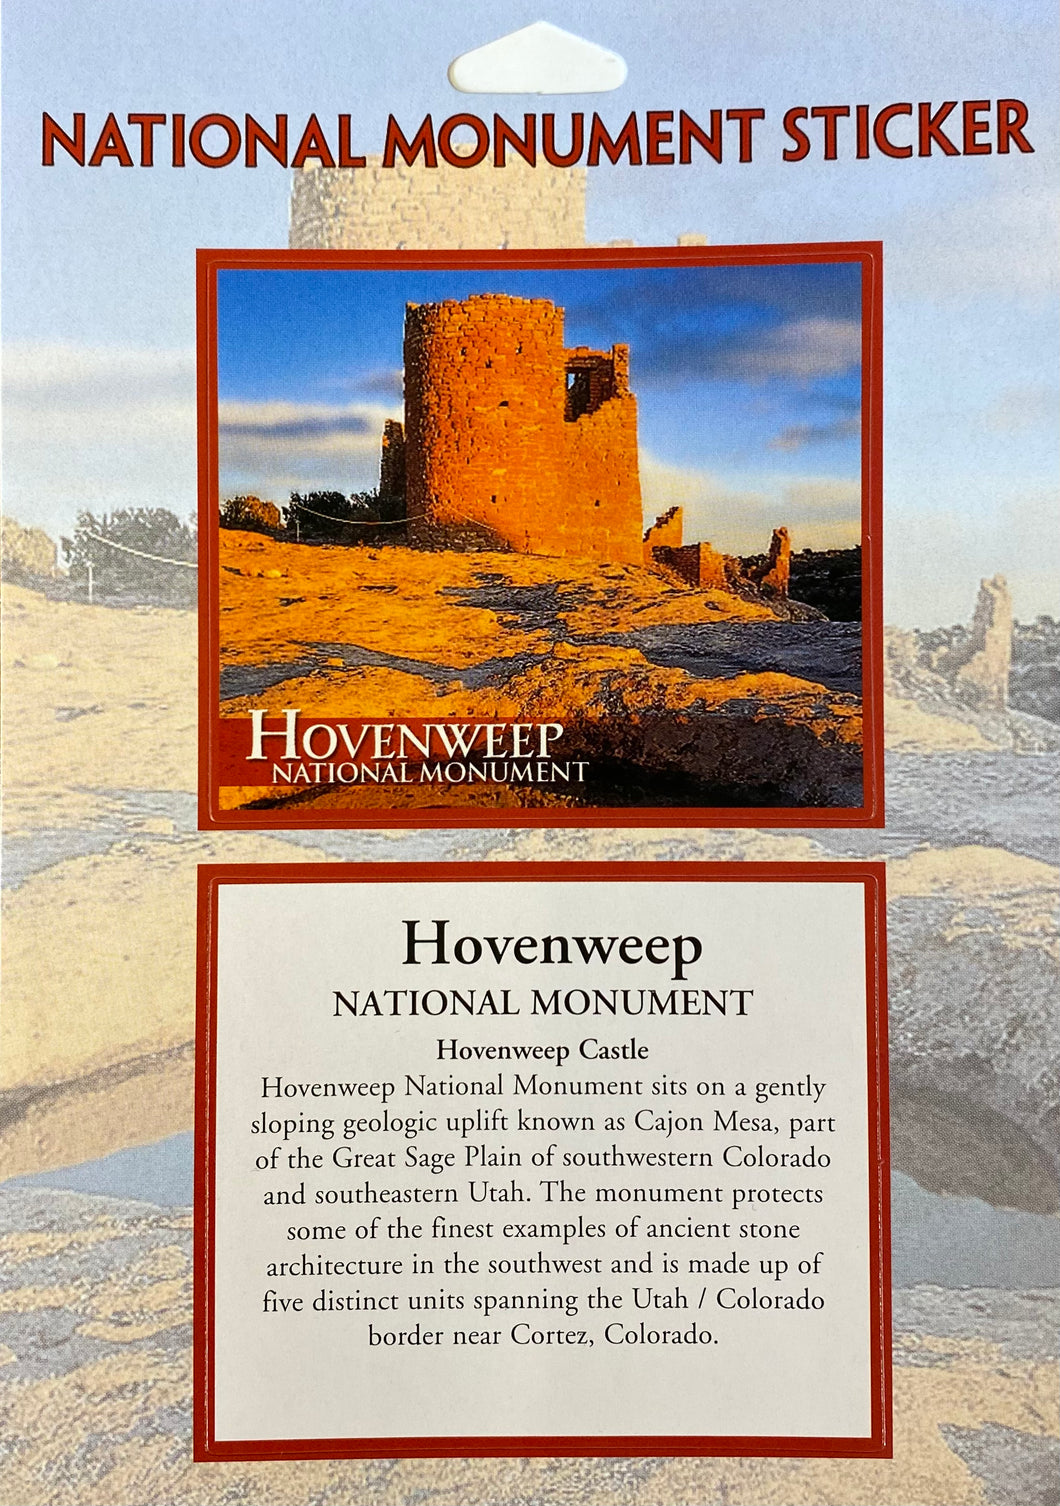 Hovenweep National Monument Sticker